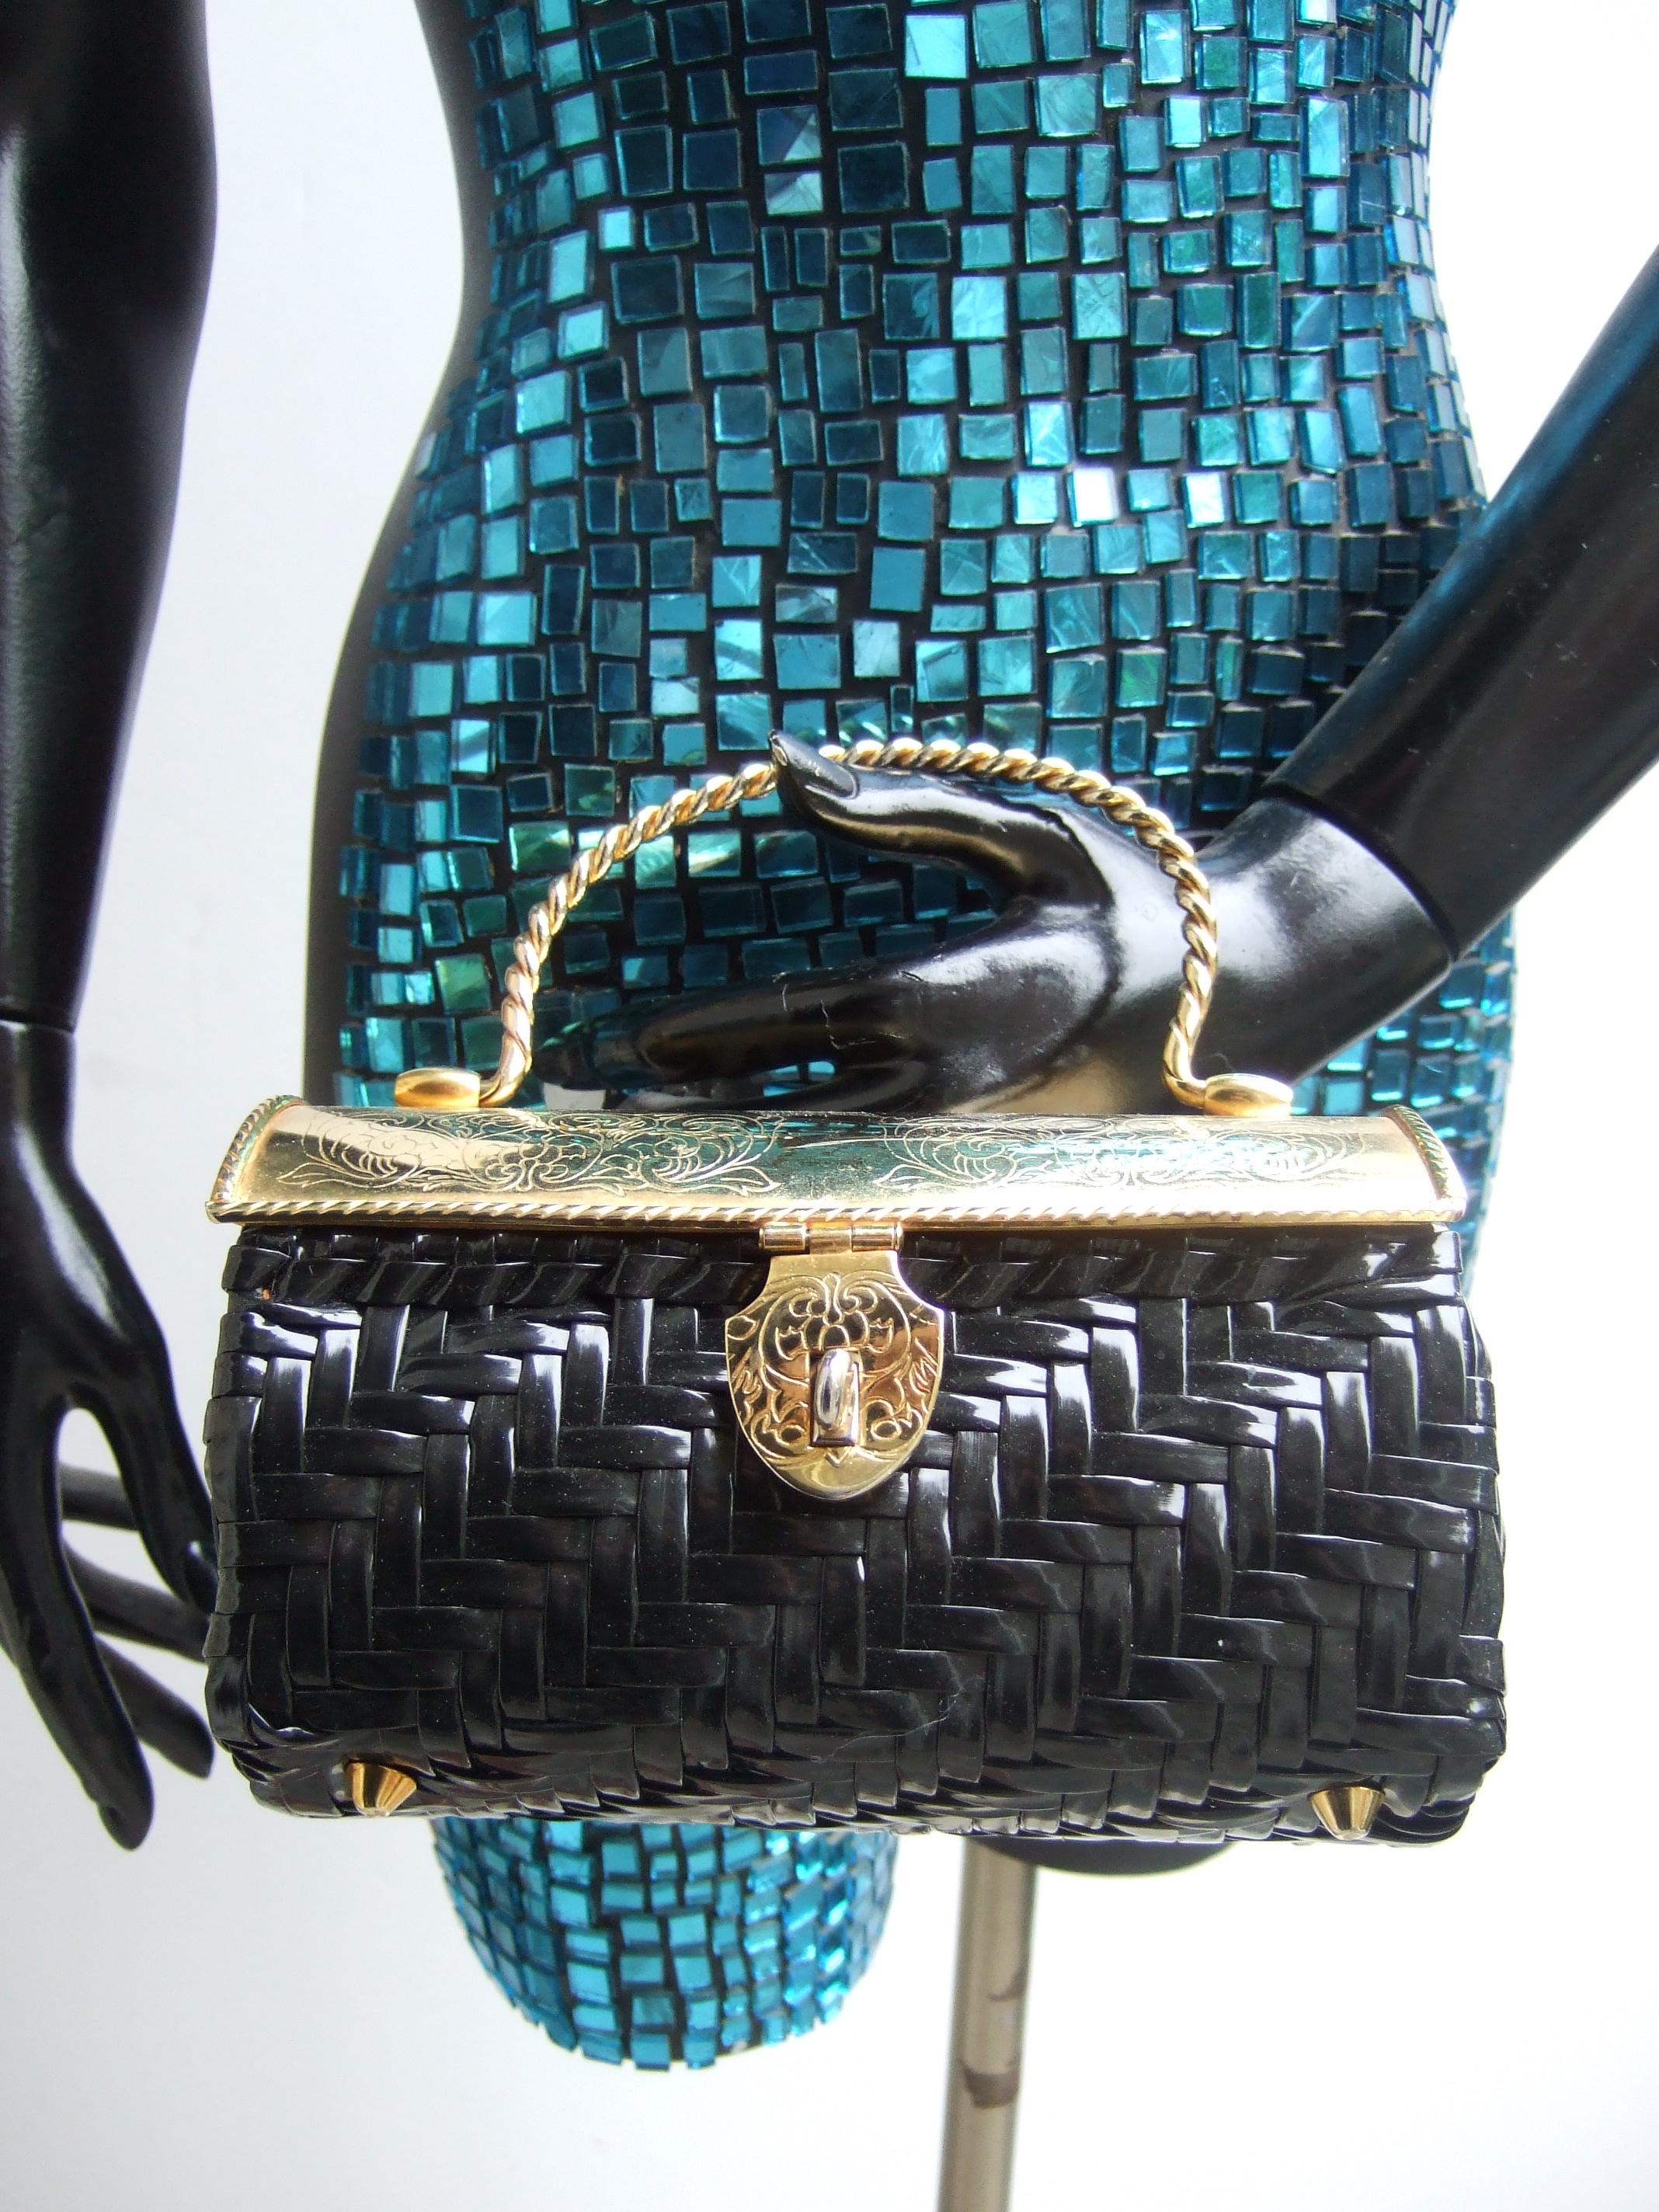 Chic gilt metal black woven vinyl cylinder box purse c 1970s
The stylish retro handbag is designed with a gilt metal curved 
hinged lid cover with subtle impressed scrolled detail

Carried with a braided gilt metal swivel handle. Constructed with